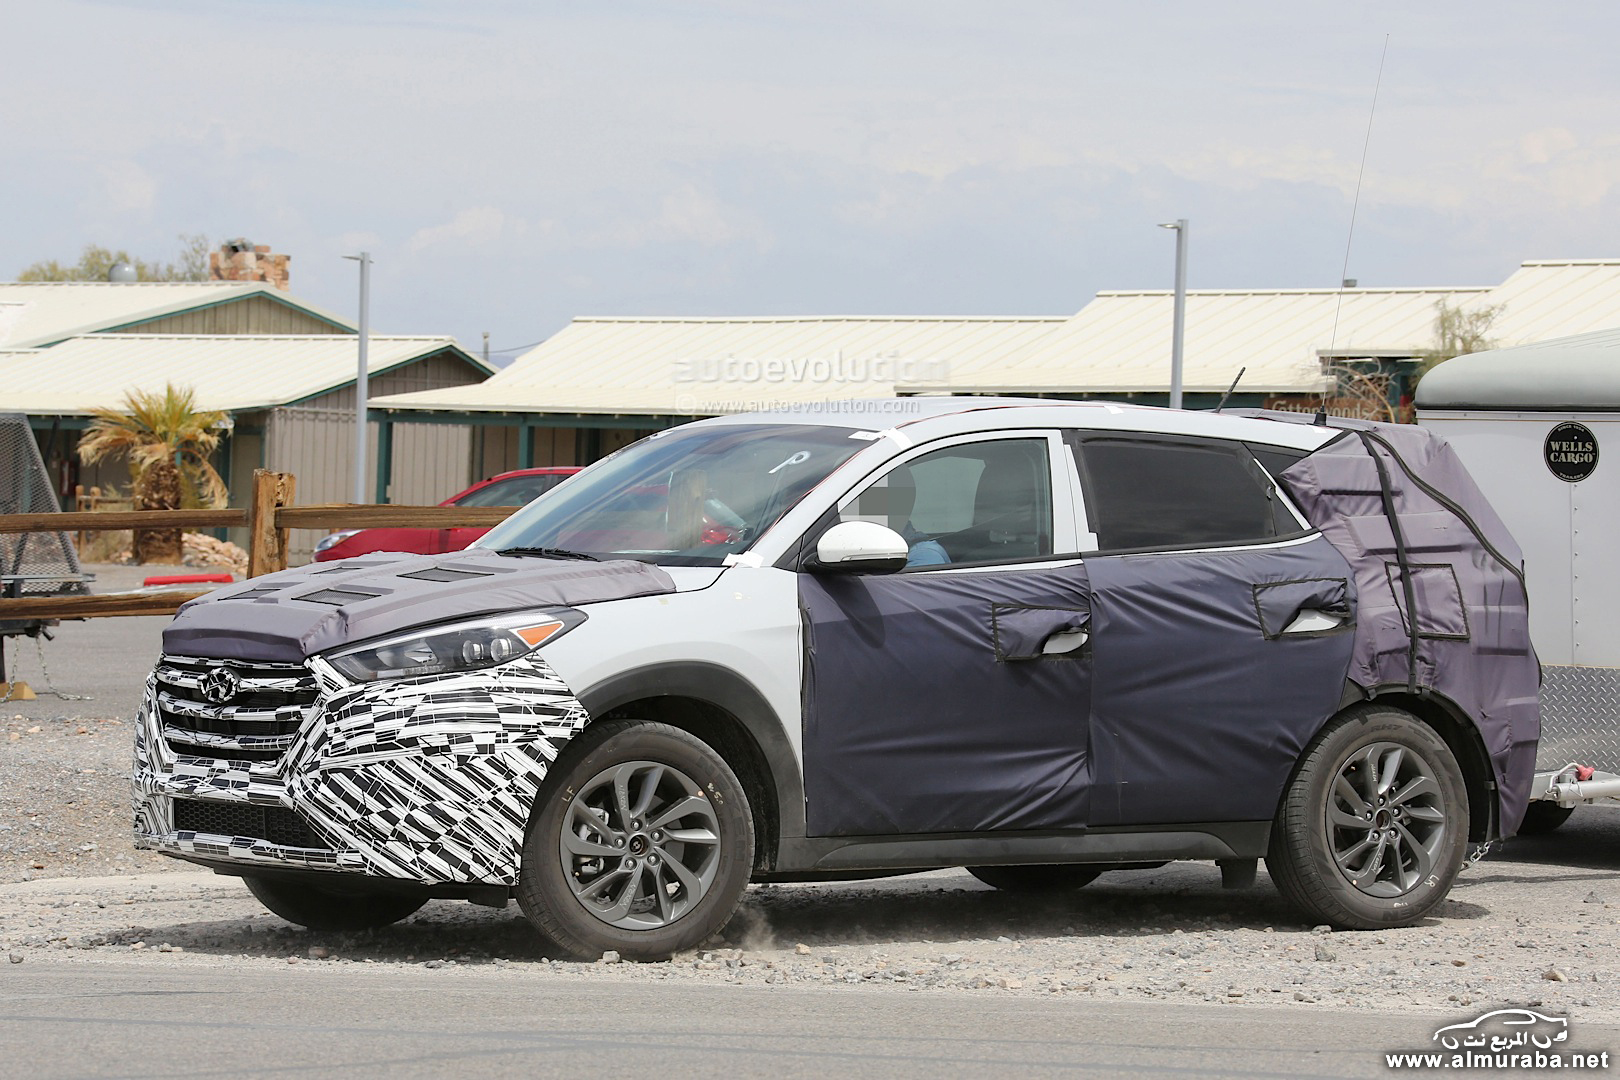 all-new-2016-hyundai-tucson-spied-with-less-camouflage-in-america-photo-gallery_6